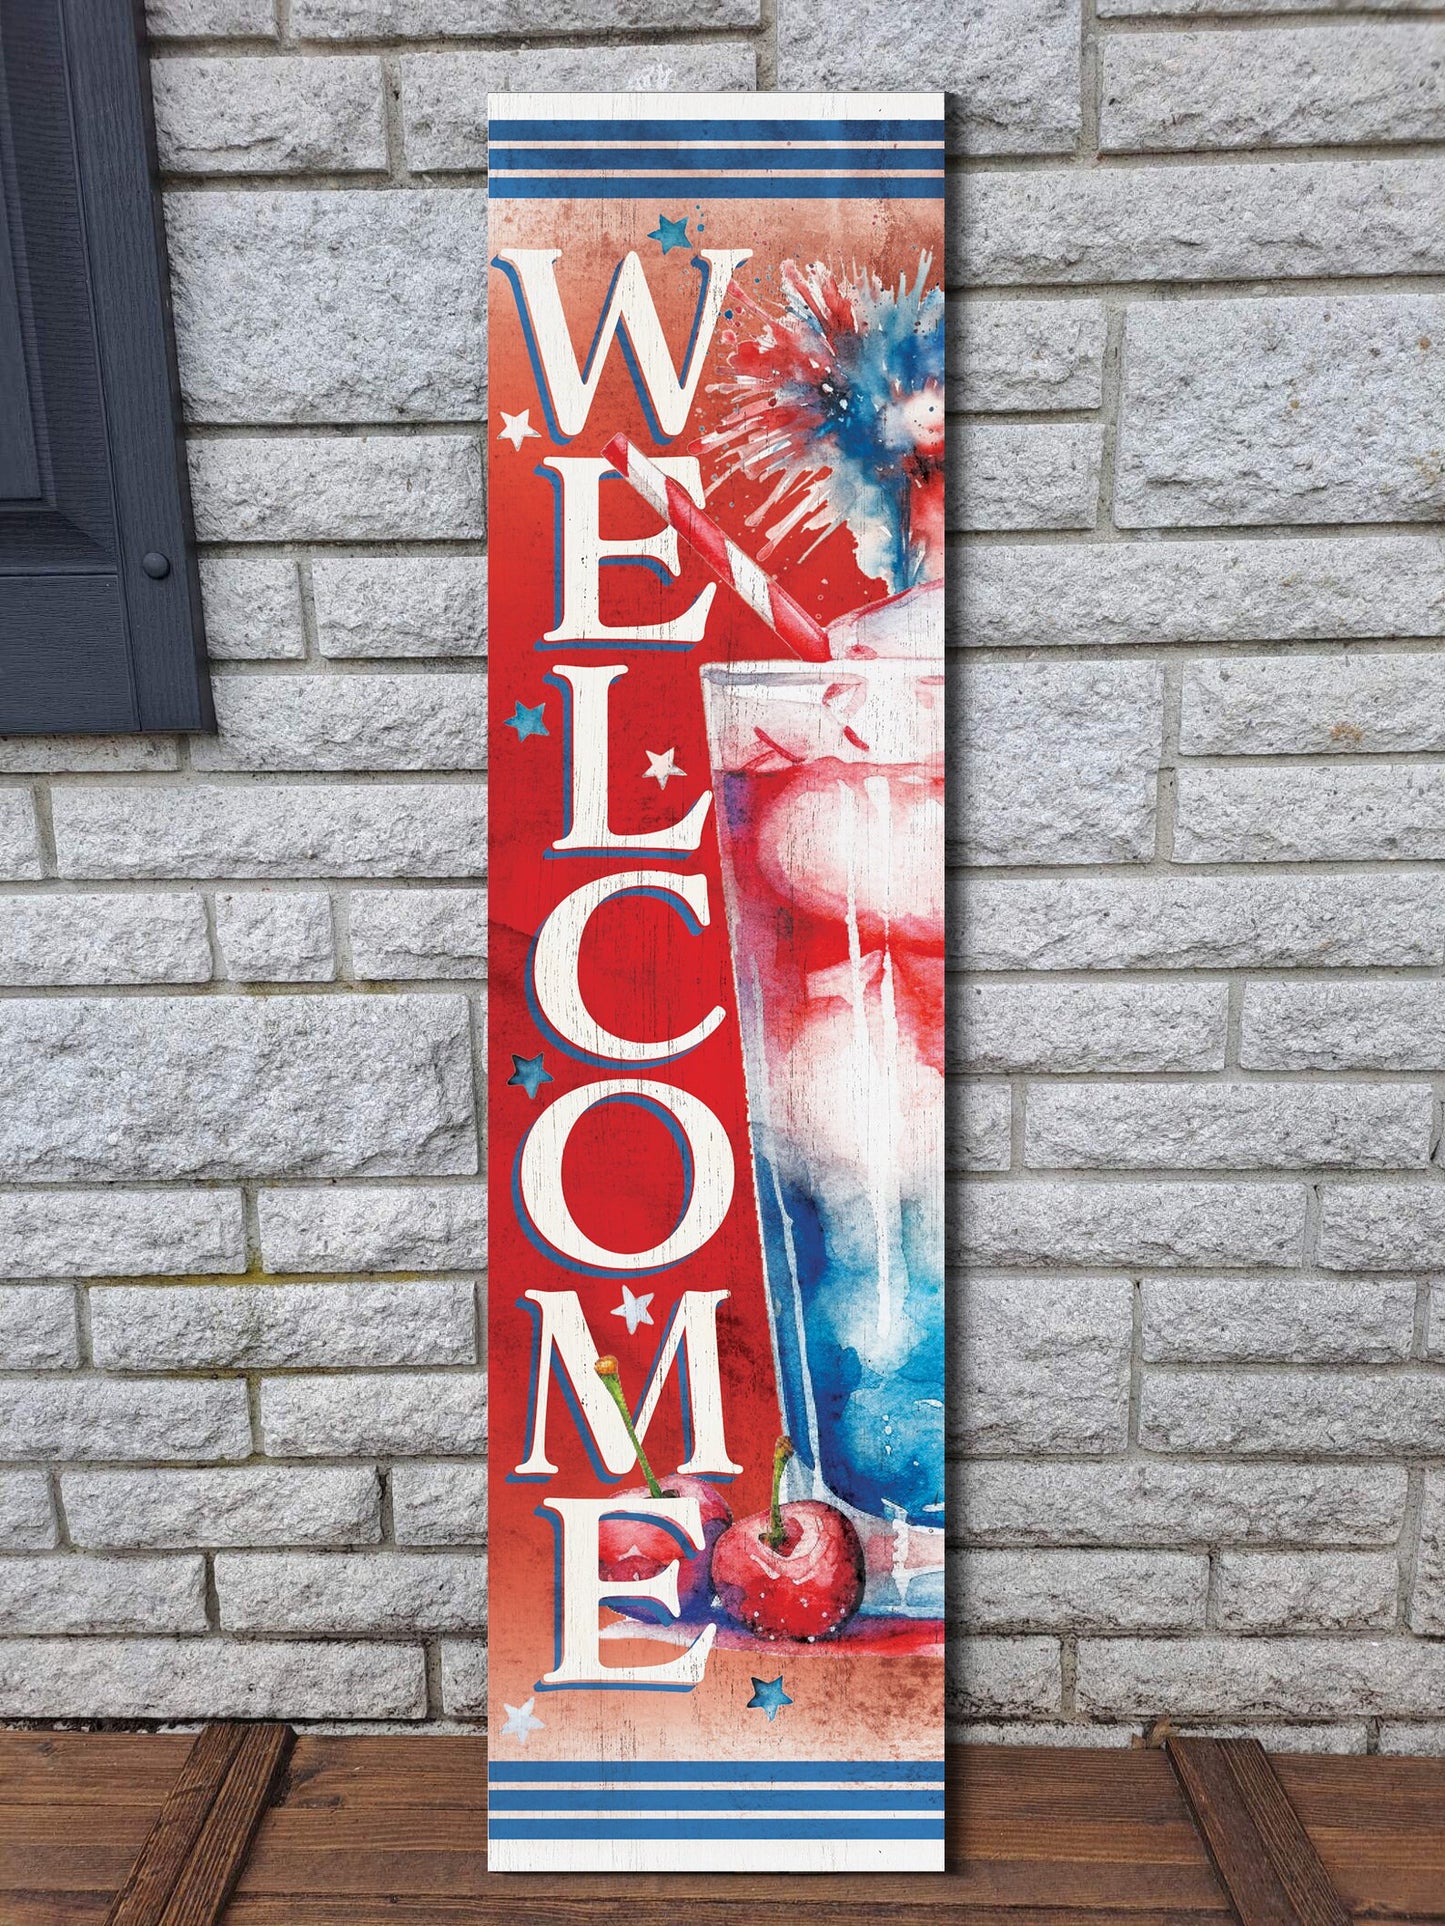 36in 4th of July Welcome to Drink Cocktail Porch Sign - Festive Outdoor Party Decorationch Sign - Patriotic Home Decor Accent